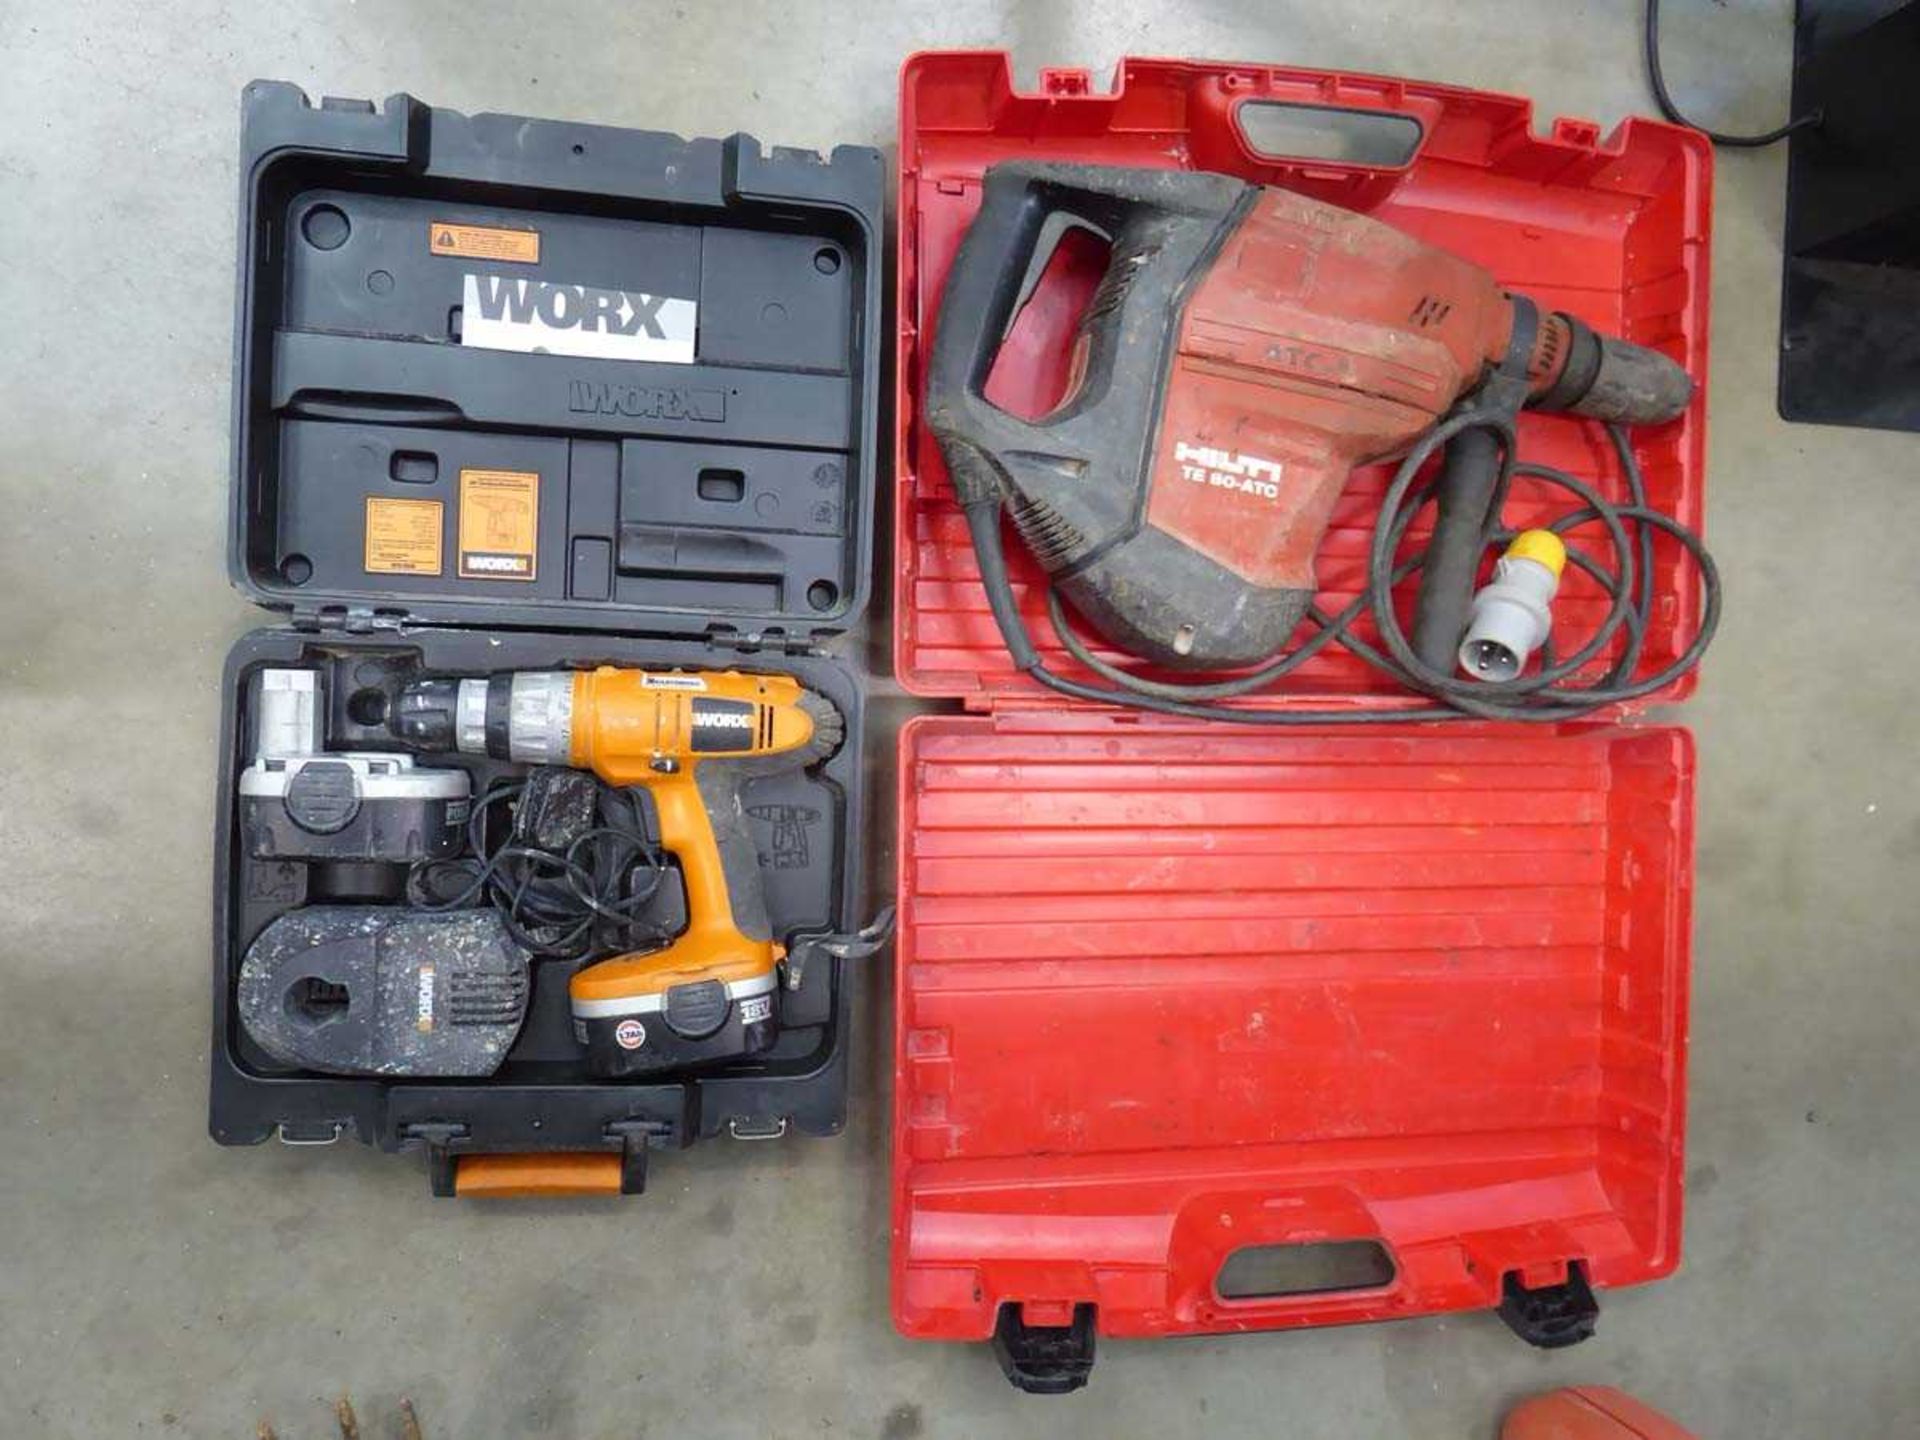 Hilti large 110V SDS breaker/drill and Worx battery drill with 2 batteries and charger